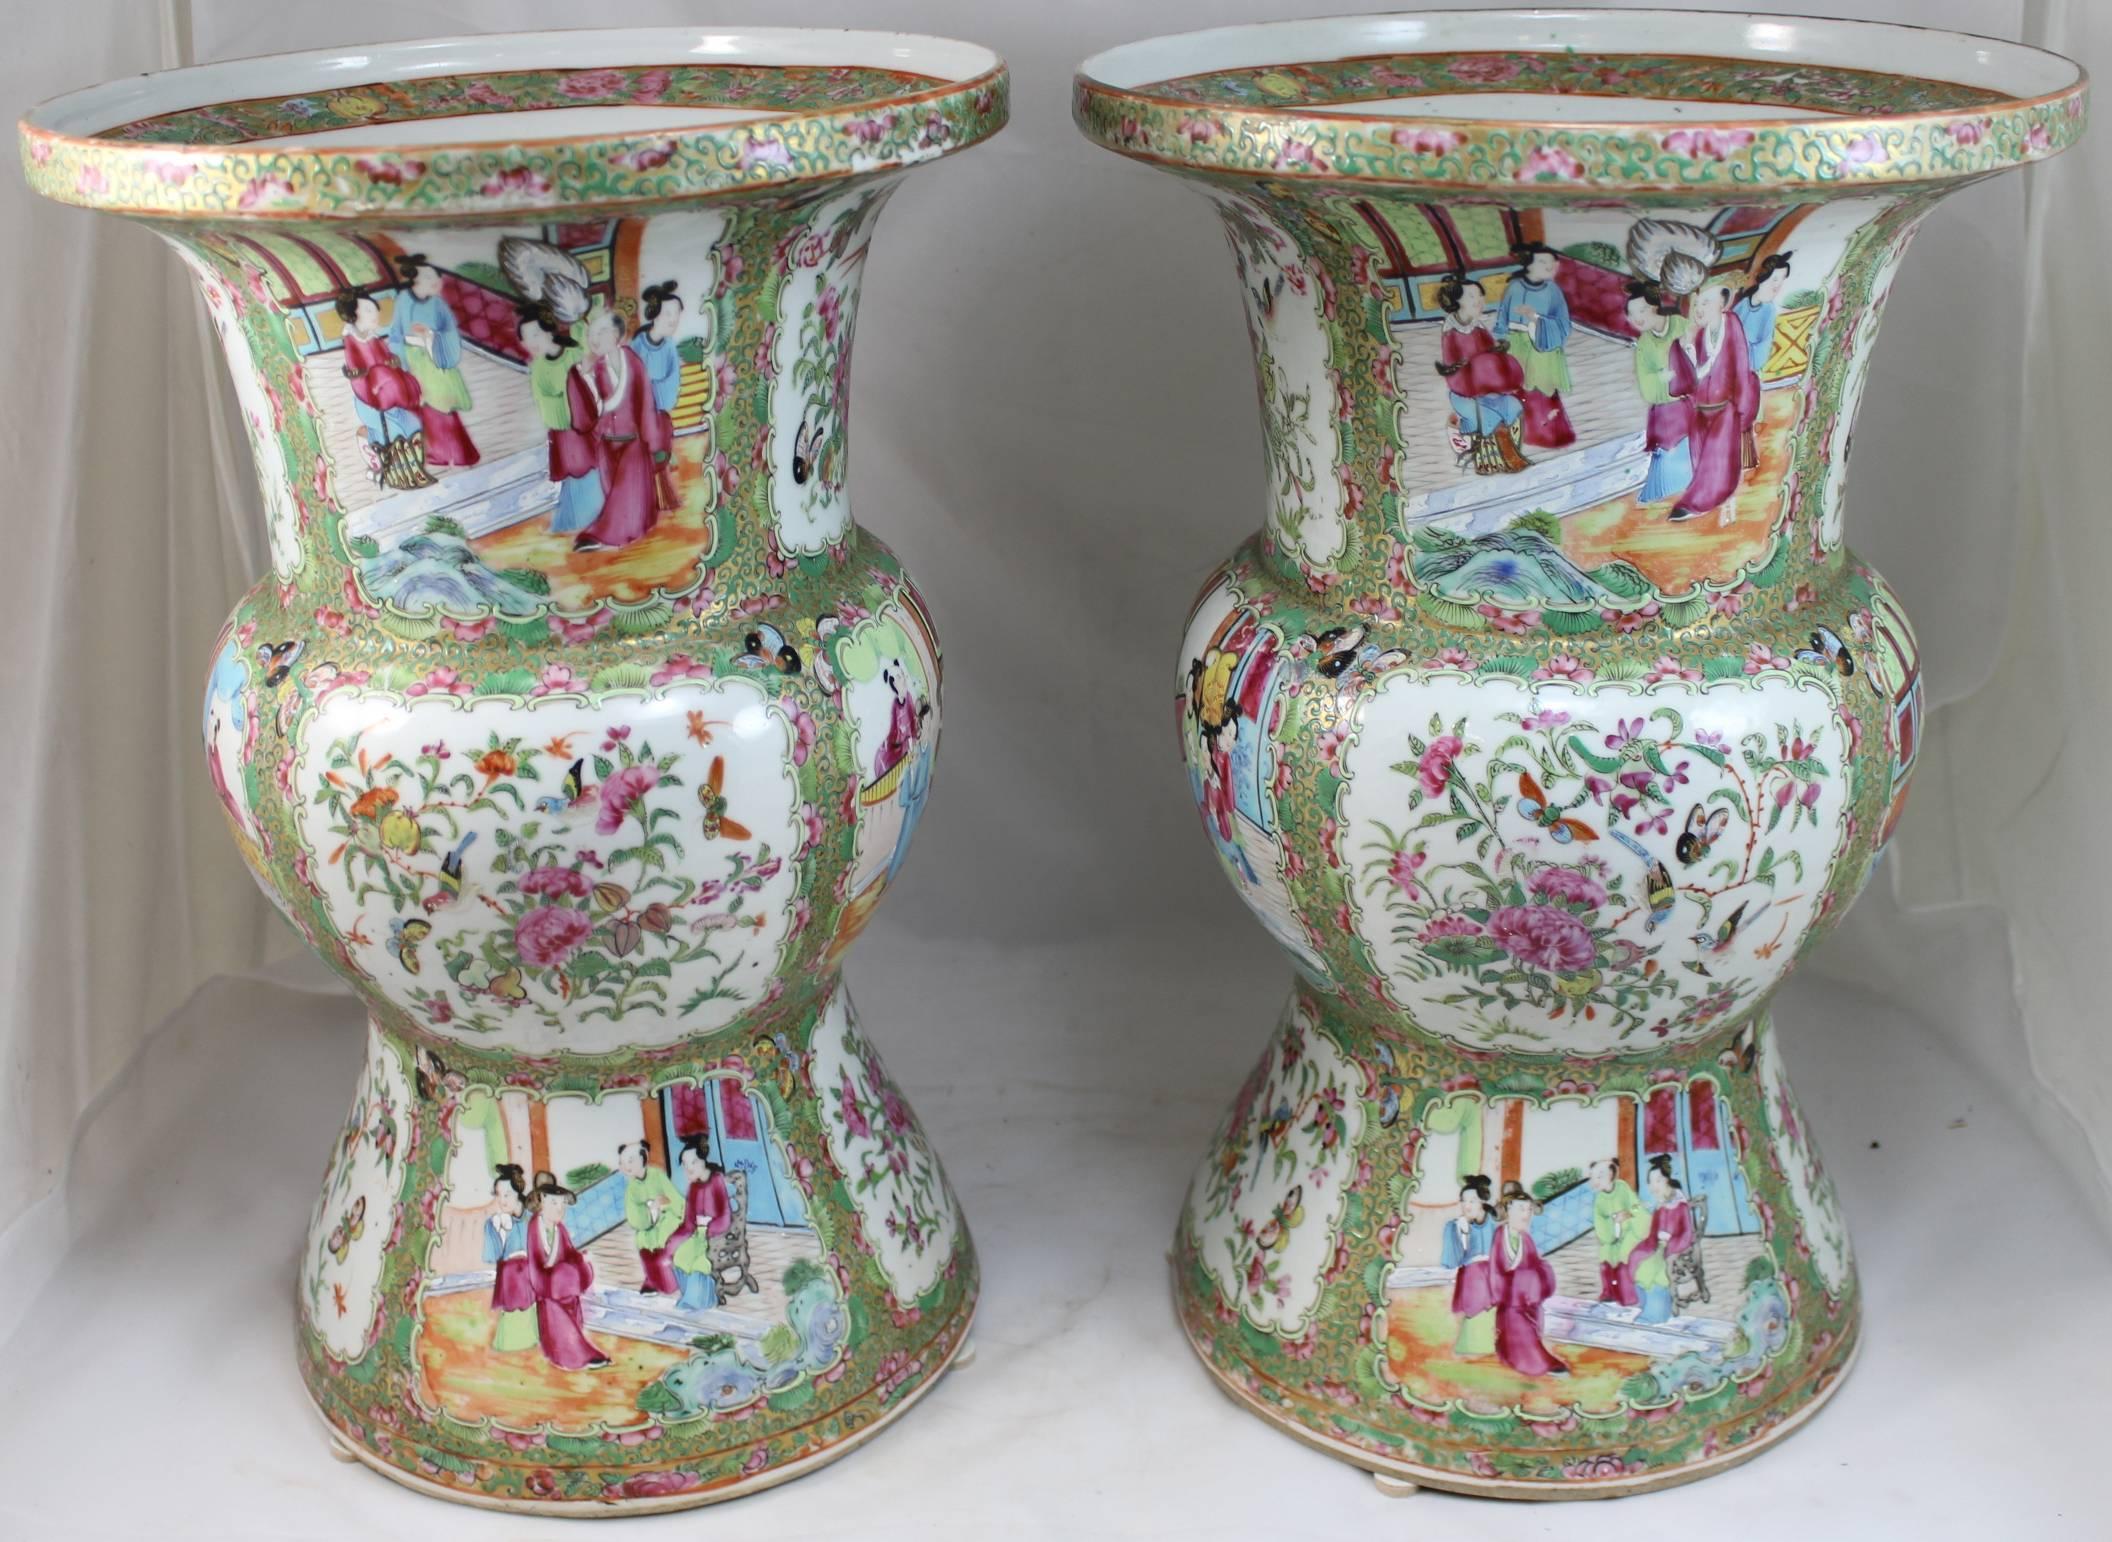 An exceptional pair of Rose Medallion Ku form vases, with four exterior alternating panels of figures and foliate scenes with birds and butterflies on each of the three sections of the vases. Superb quality.